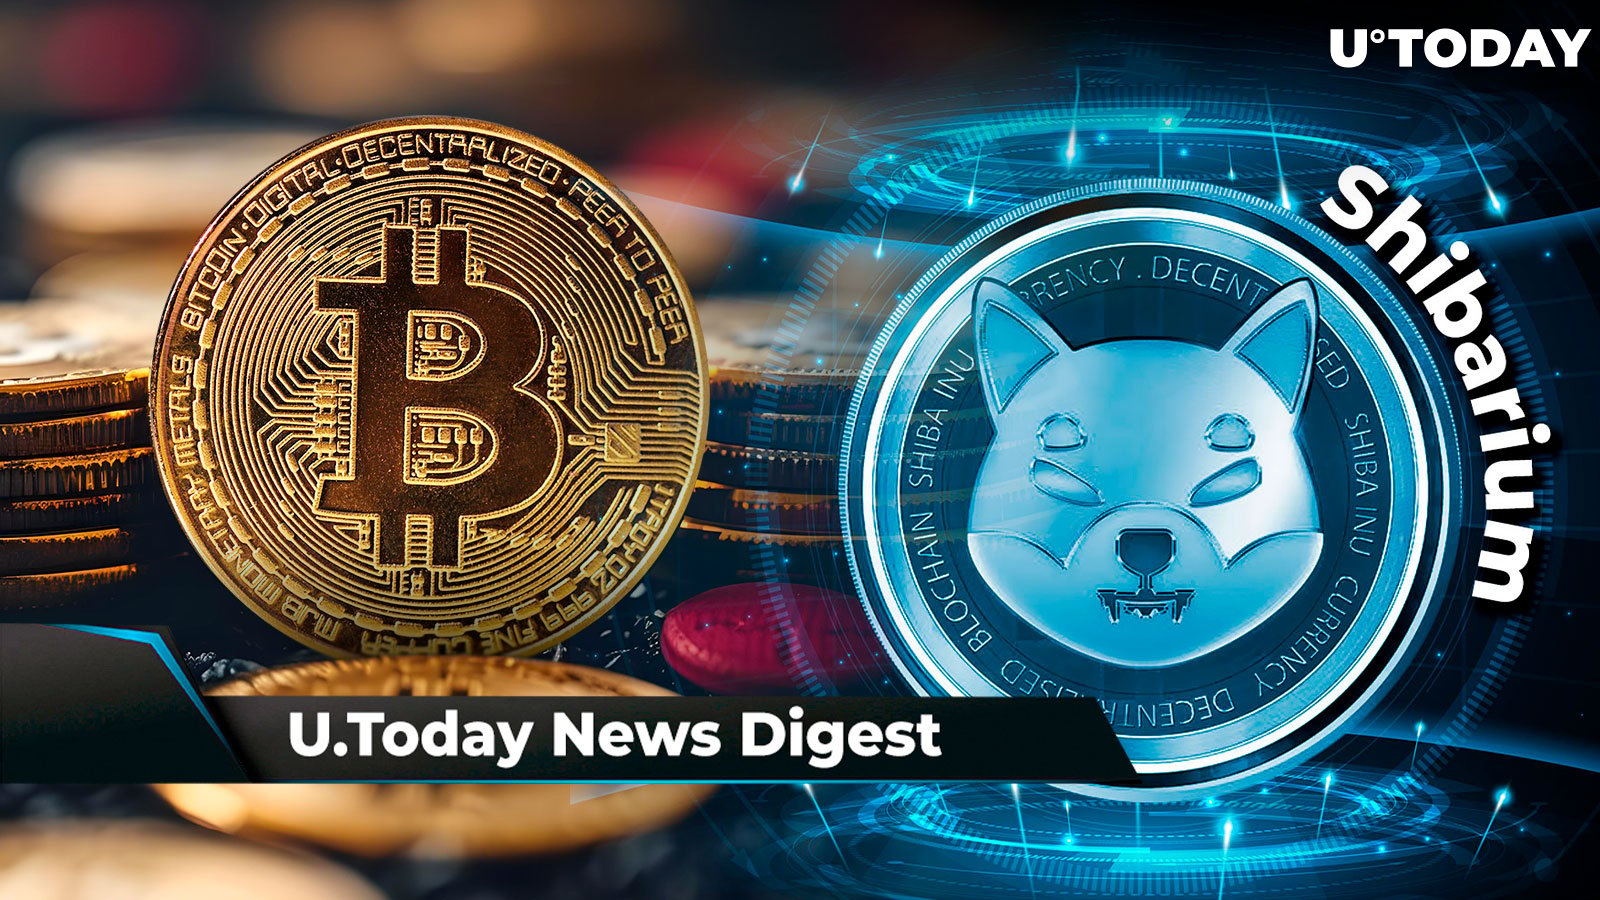 Shibarium Sees 500% Spike in Transaction Fees, Bitcoin at End of Correction, Says Top Analyst, Robinhood Makes Important Announcement for Uniswap Users: Crypto News Digest by U.Today